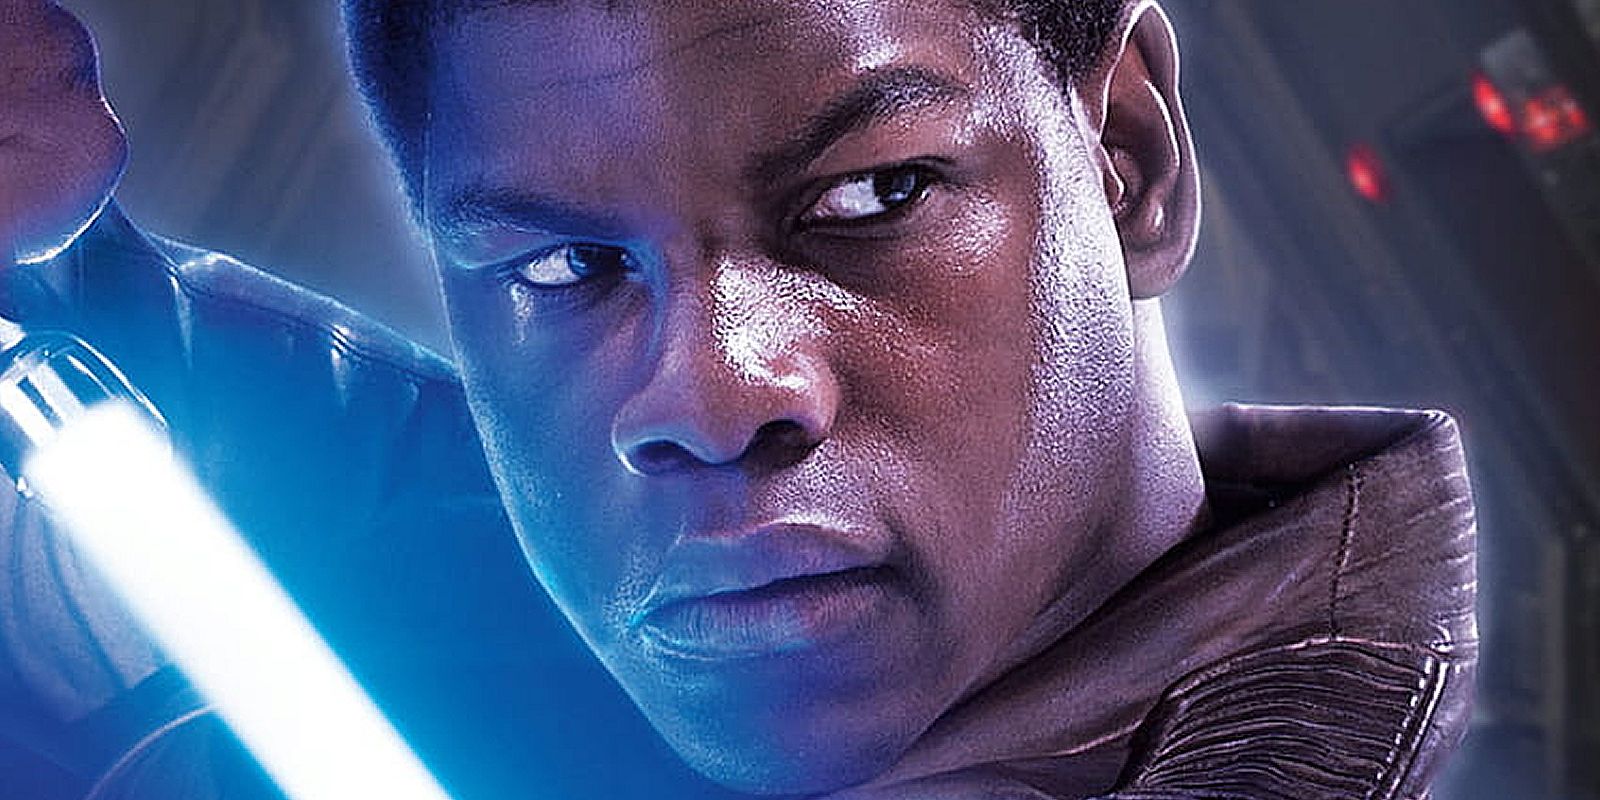 Finn with a blue lightsaber in Star Wars The Force Awakens